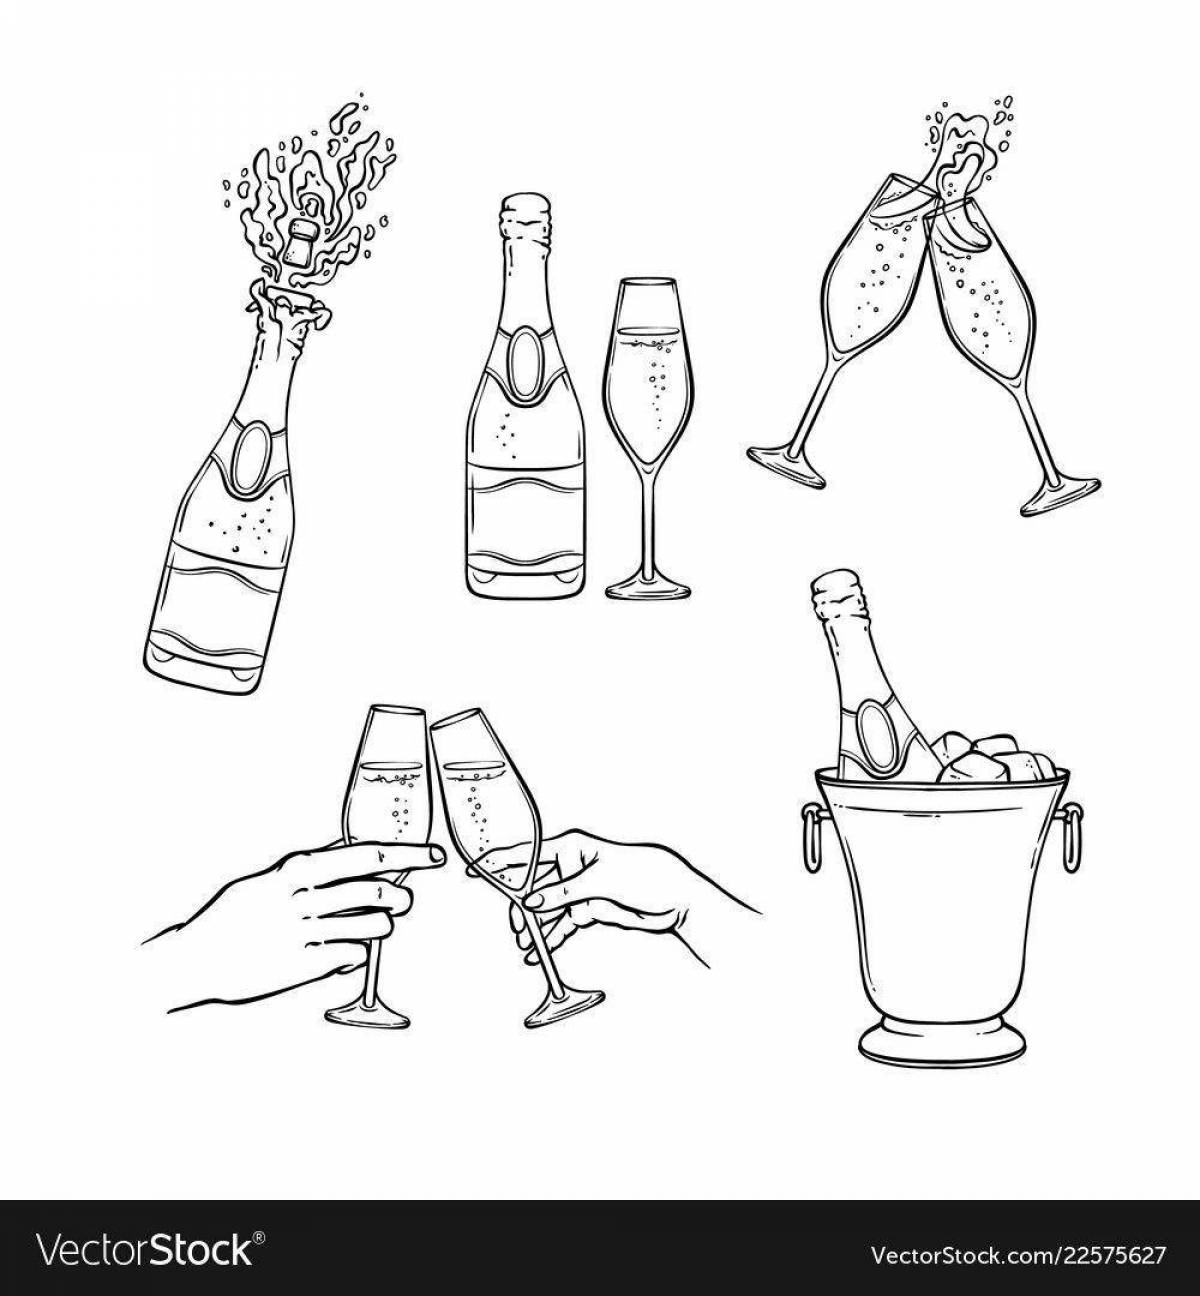 Great champagne bottle coloring book